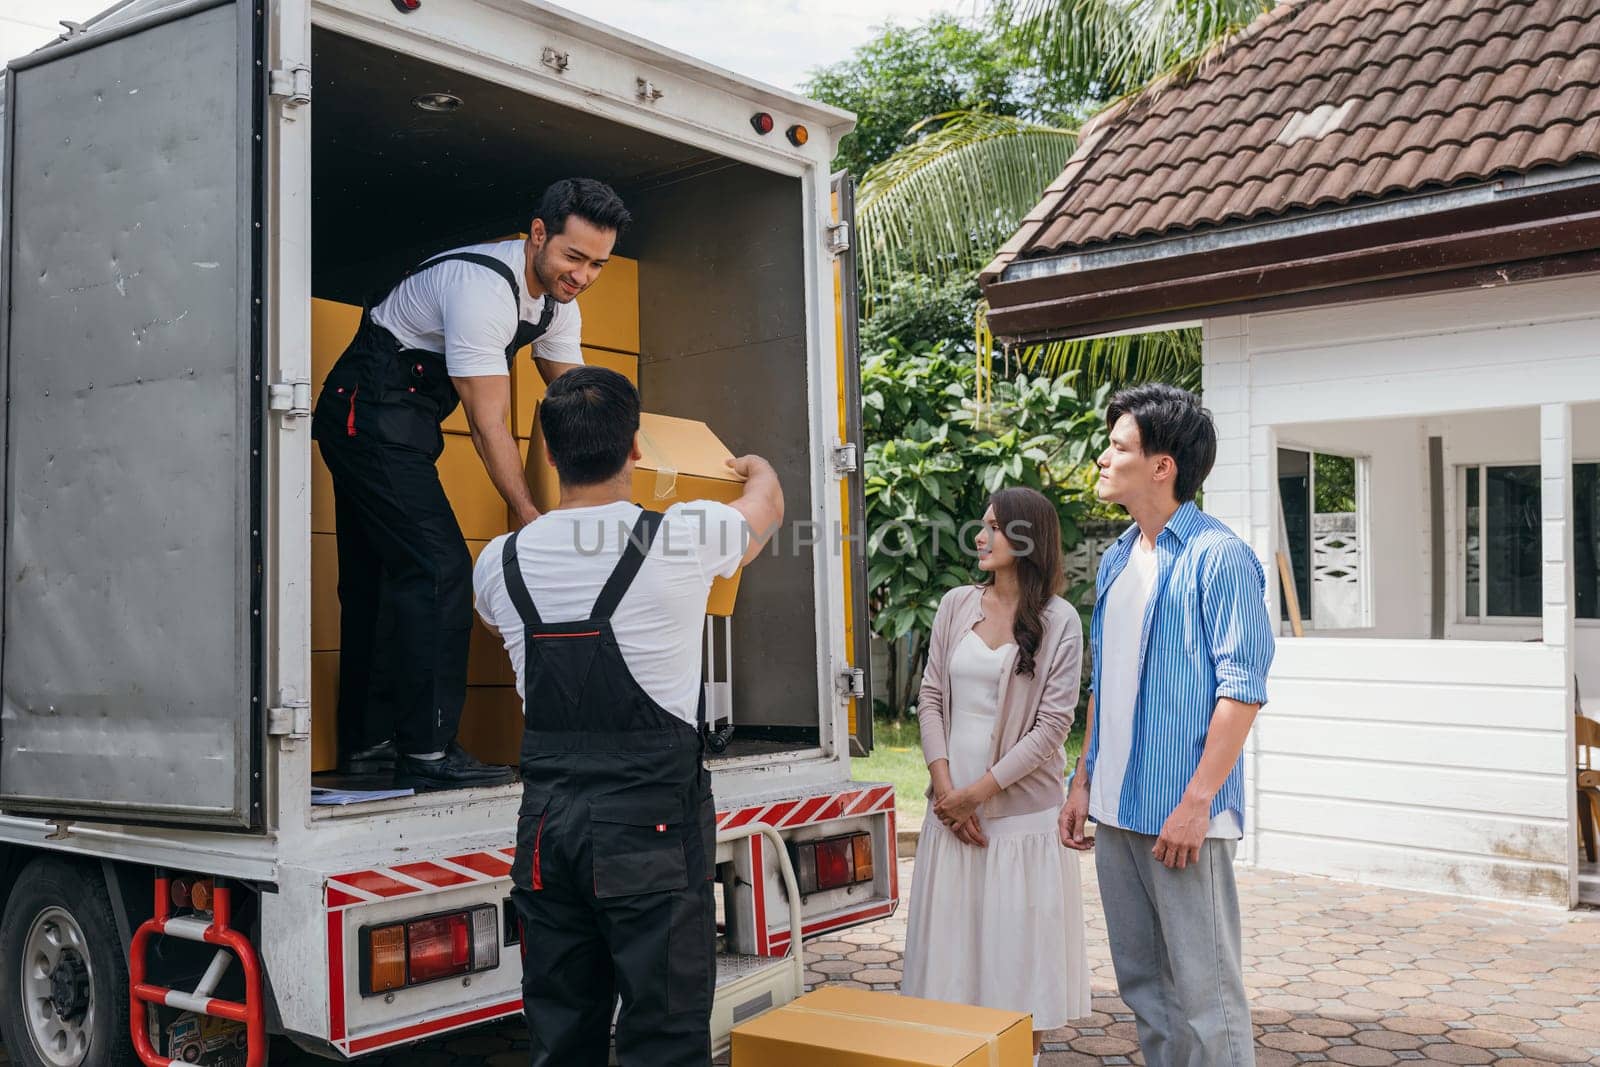 Employees work in unison to help a couple relocate to their new home. They efficiently unload and lift cardboard boxes providing top-notch delivery service. Moving Day Concept